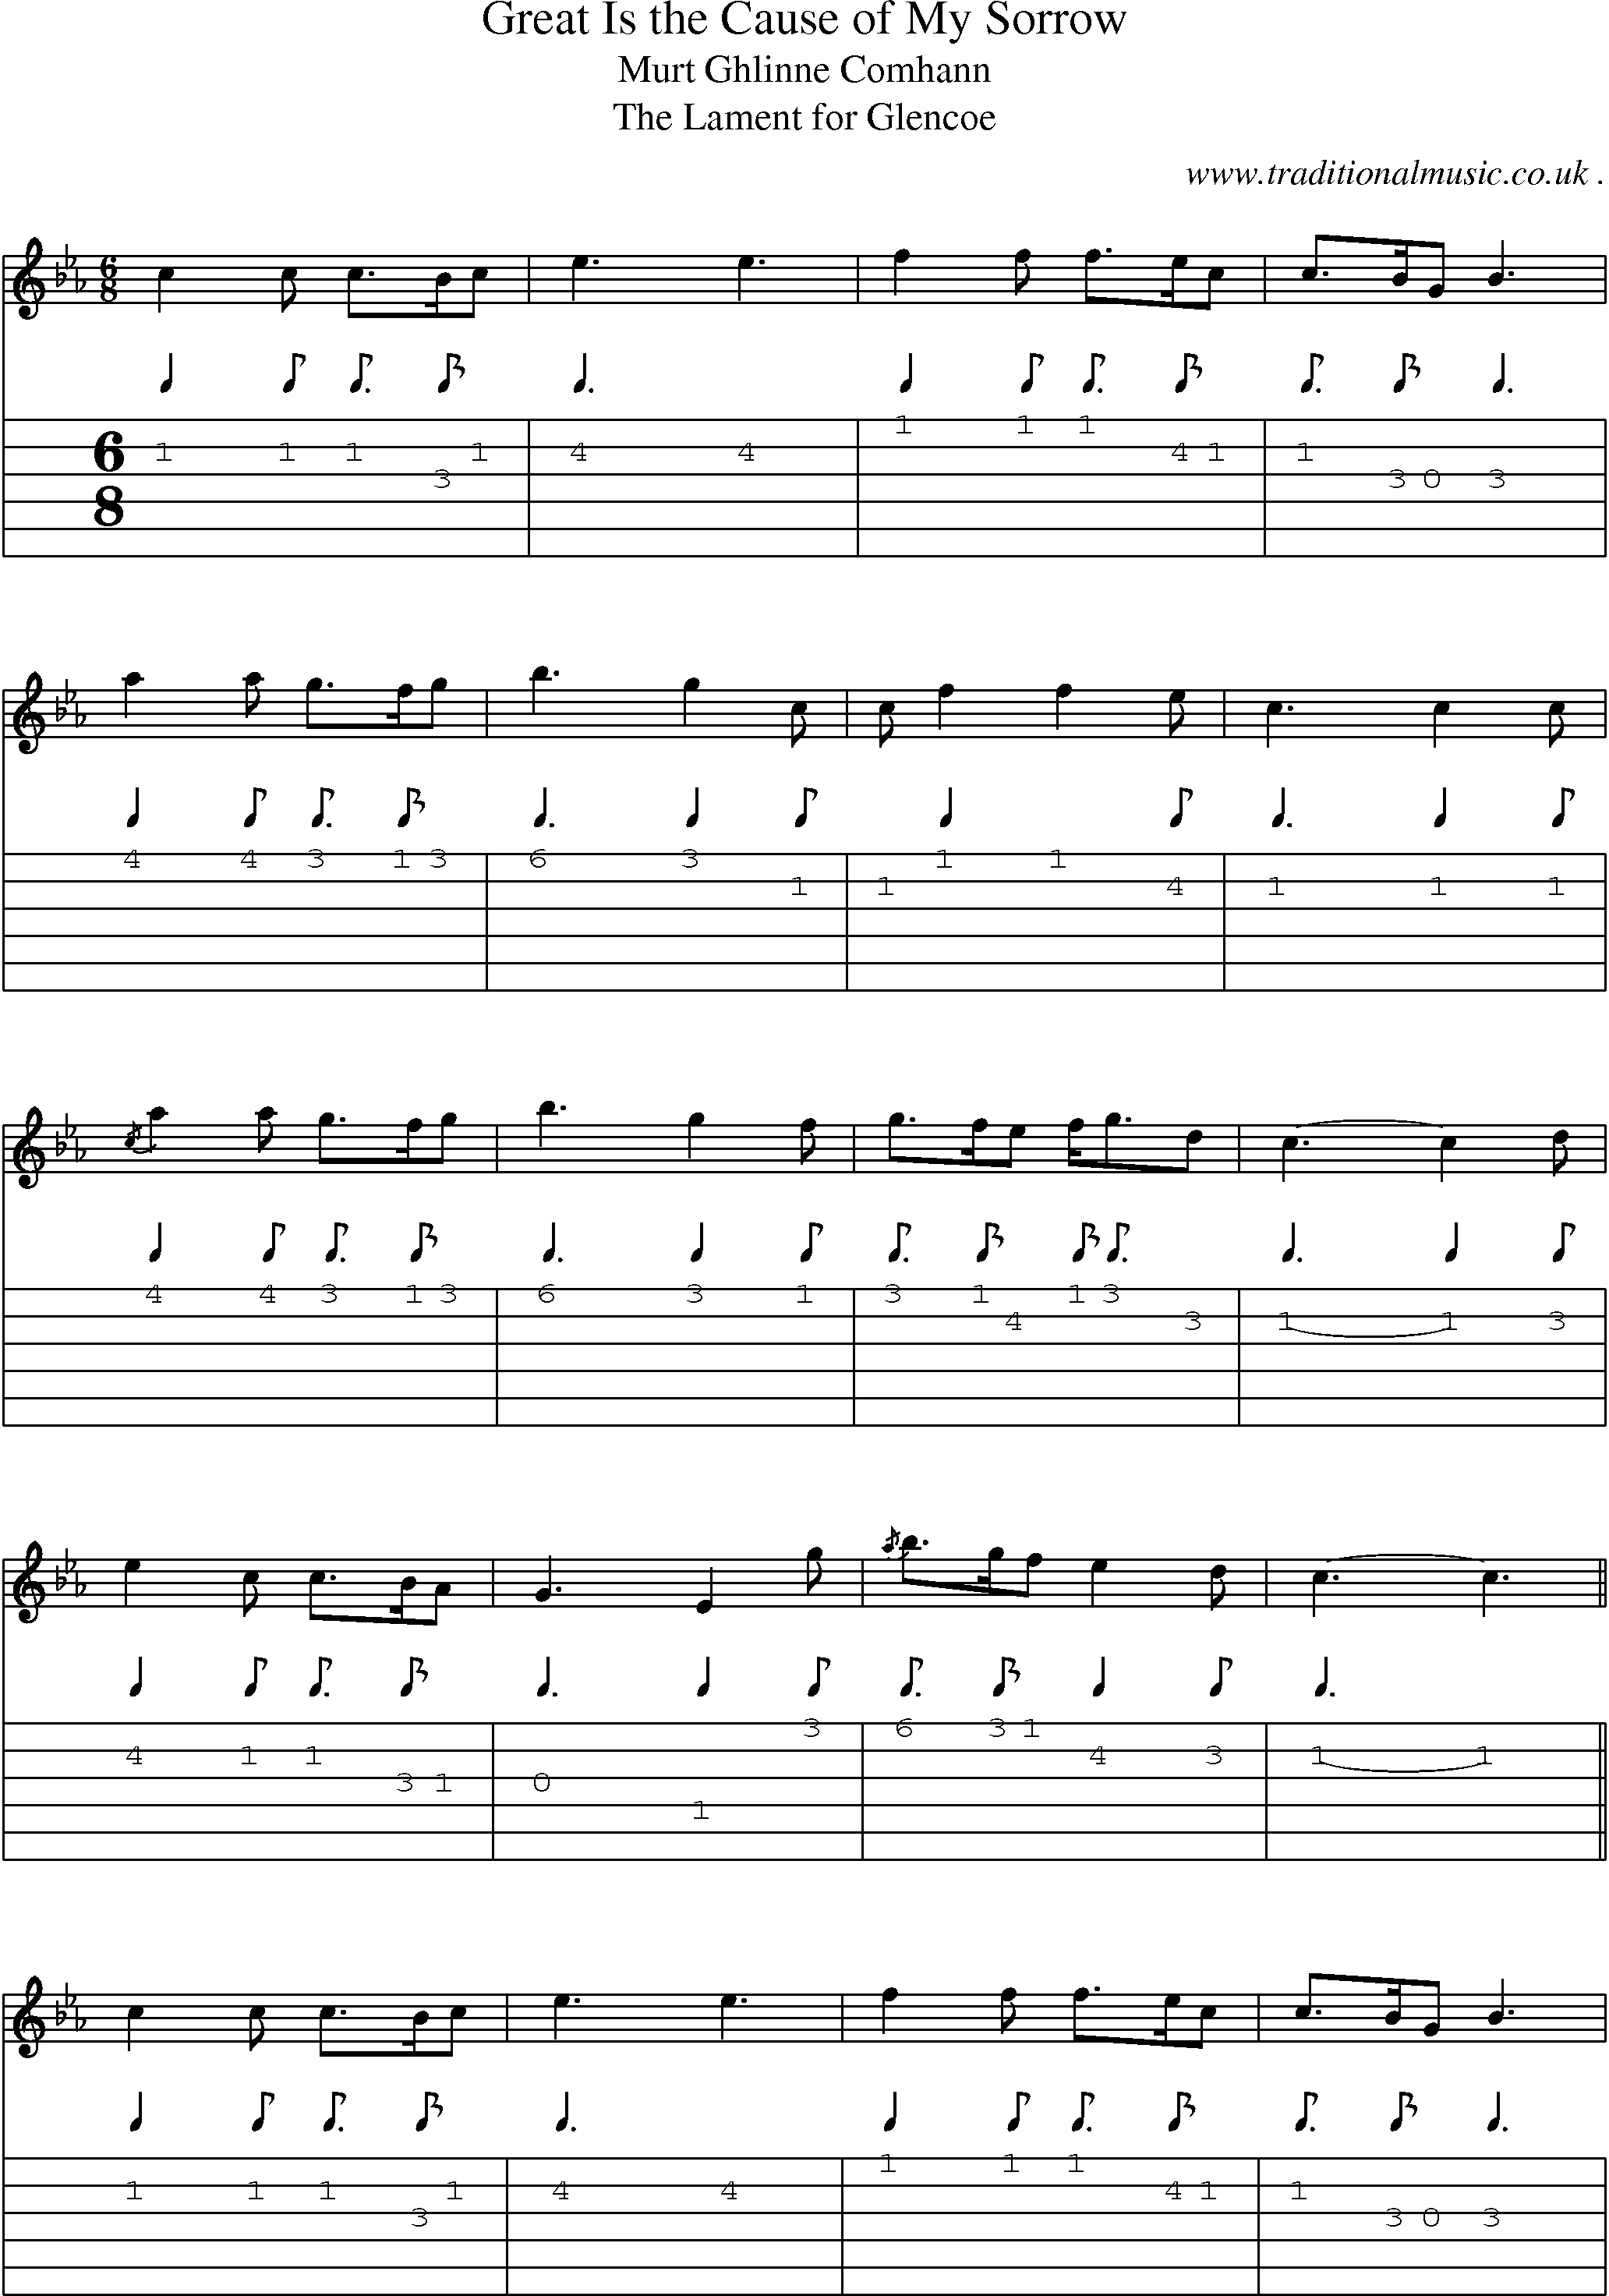 Sheet-music  score, Chords and Guitar Tabs for Great Is The Cause Of My Sorrow